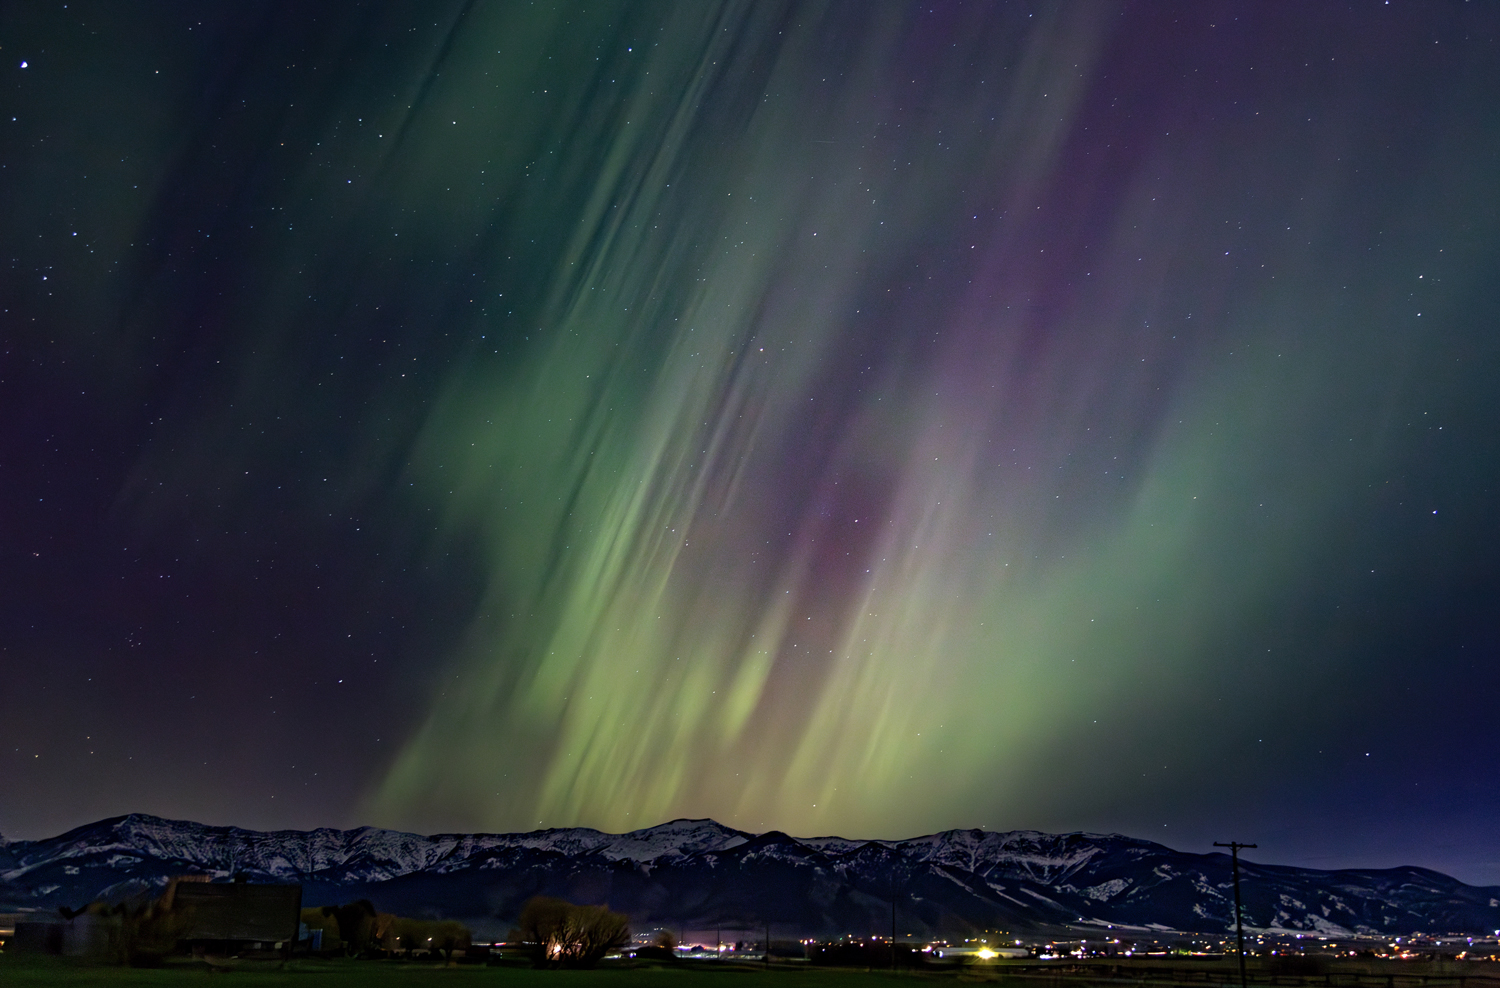 Dramatic streaks of green and purple in the night sky above mountains